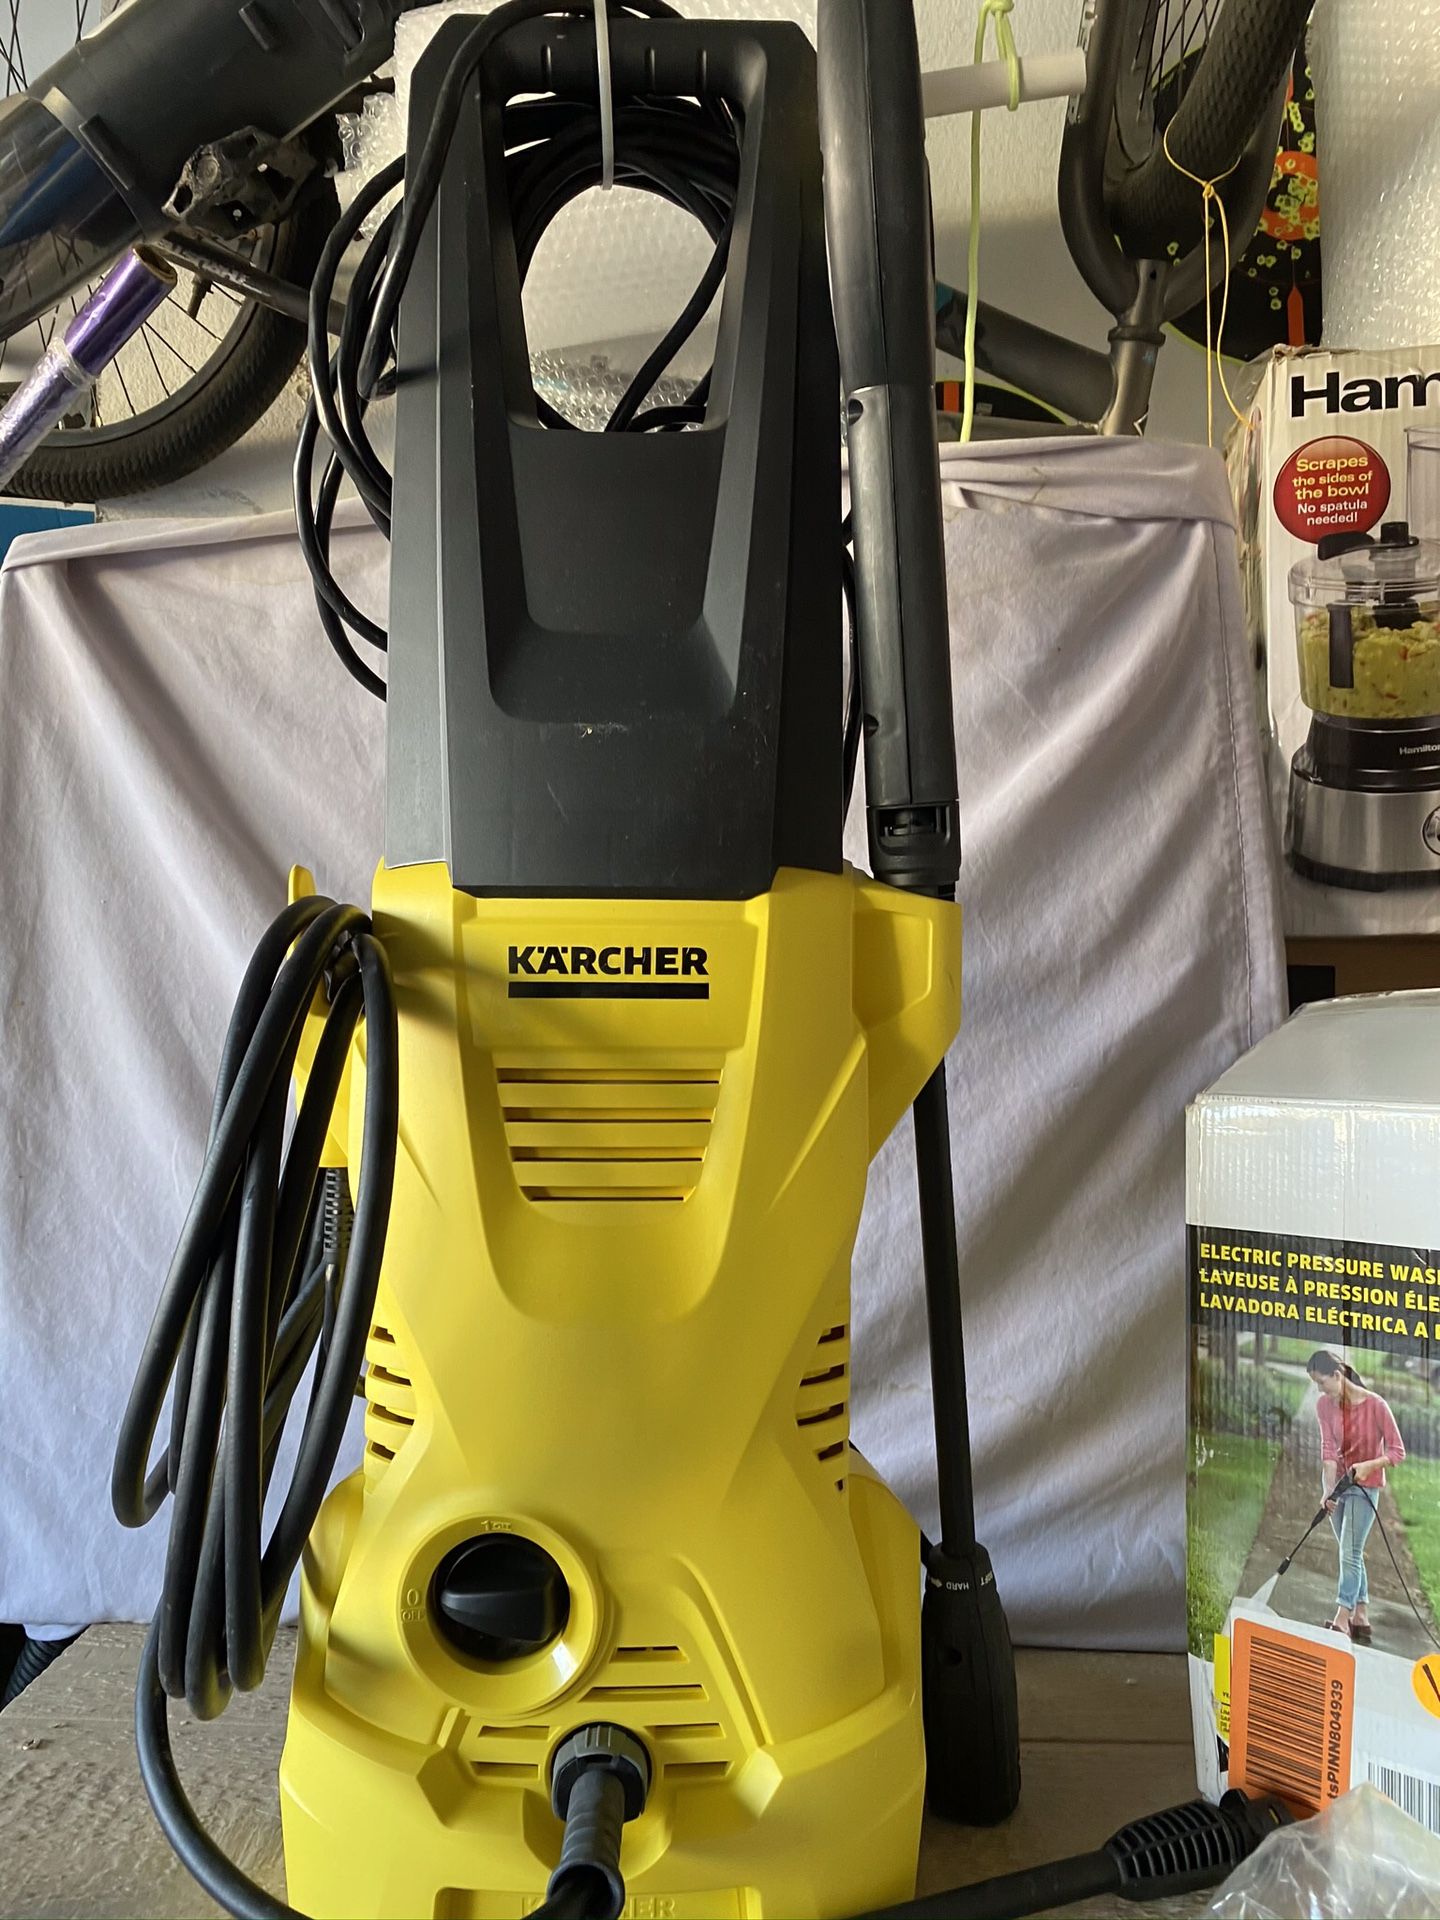 Kracher K2 plus electric power pressure washer 1600 PSI / 1.25 GPM new in excellent working condition all accessories included in open box